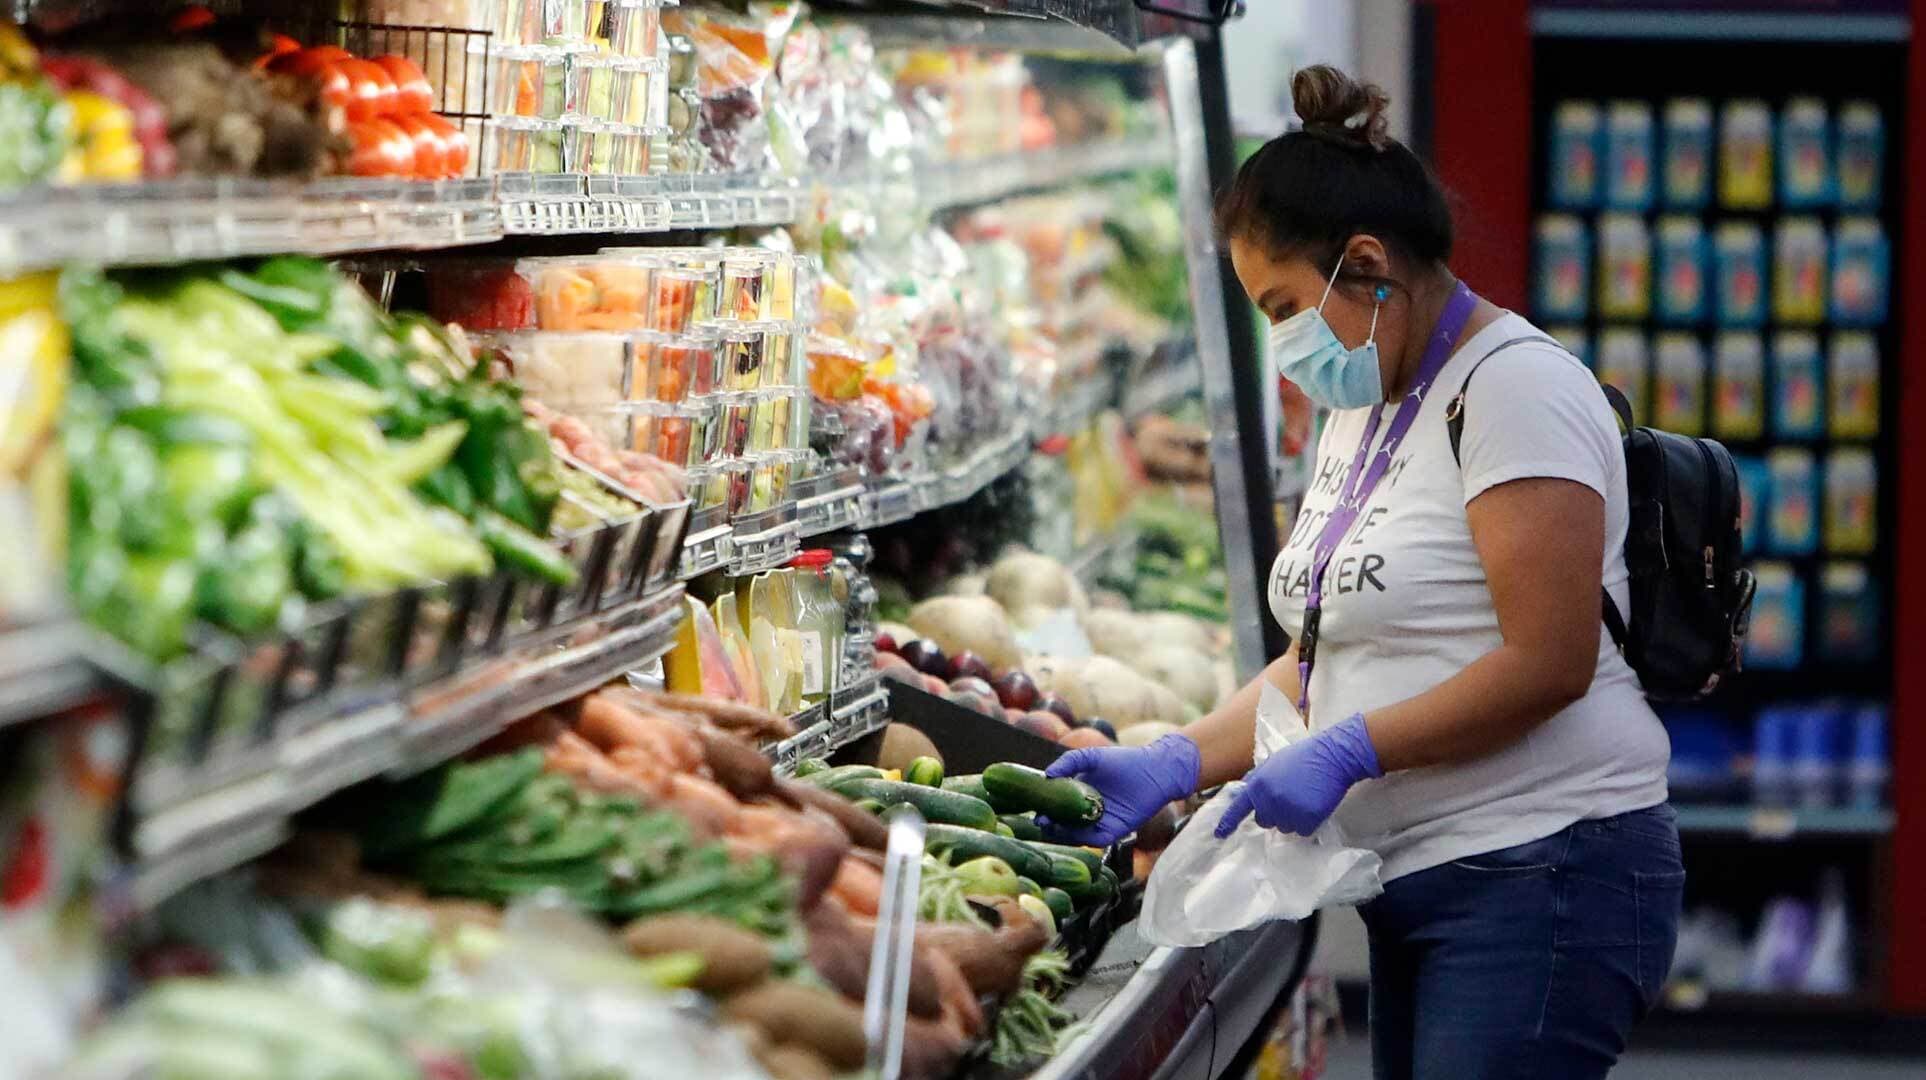 Woman wears surgical mask at grocery store